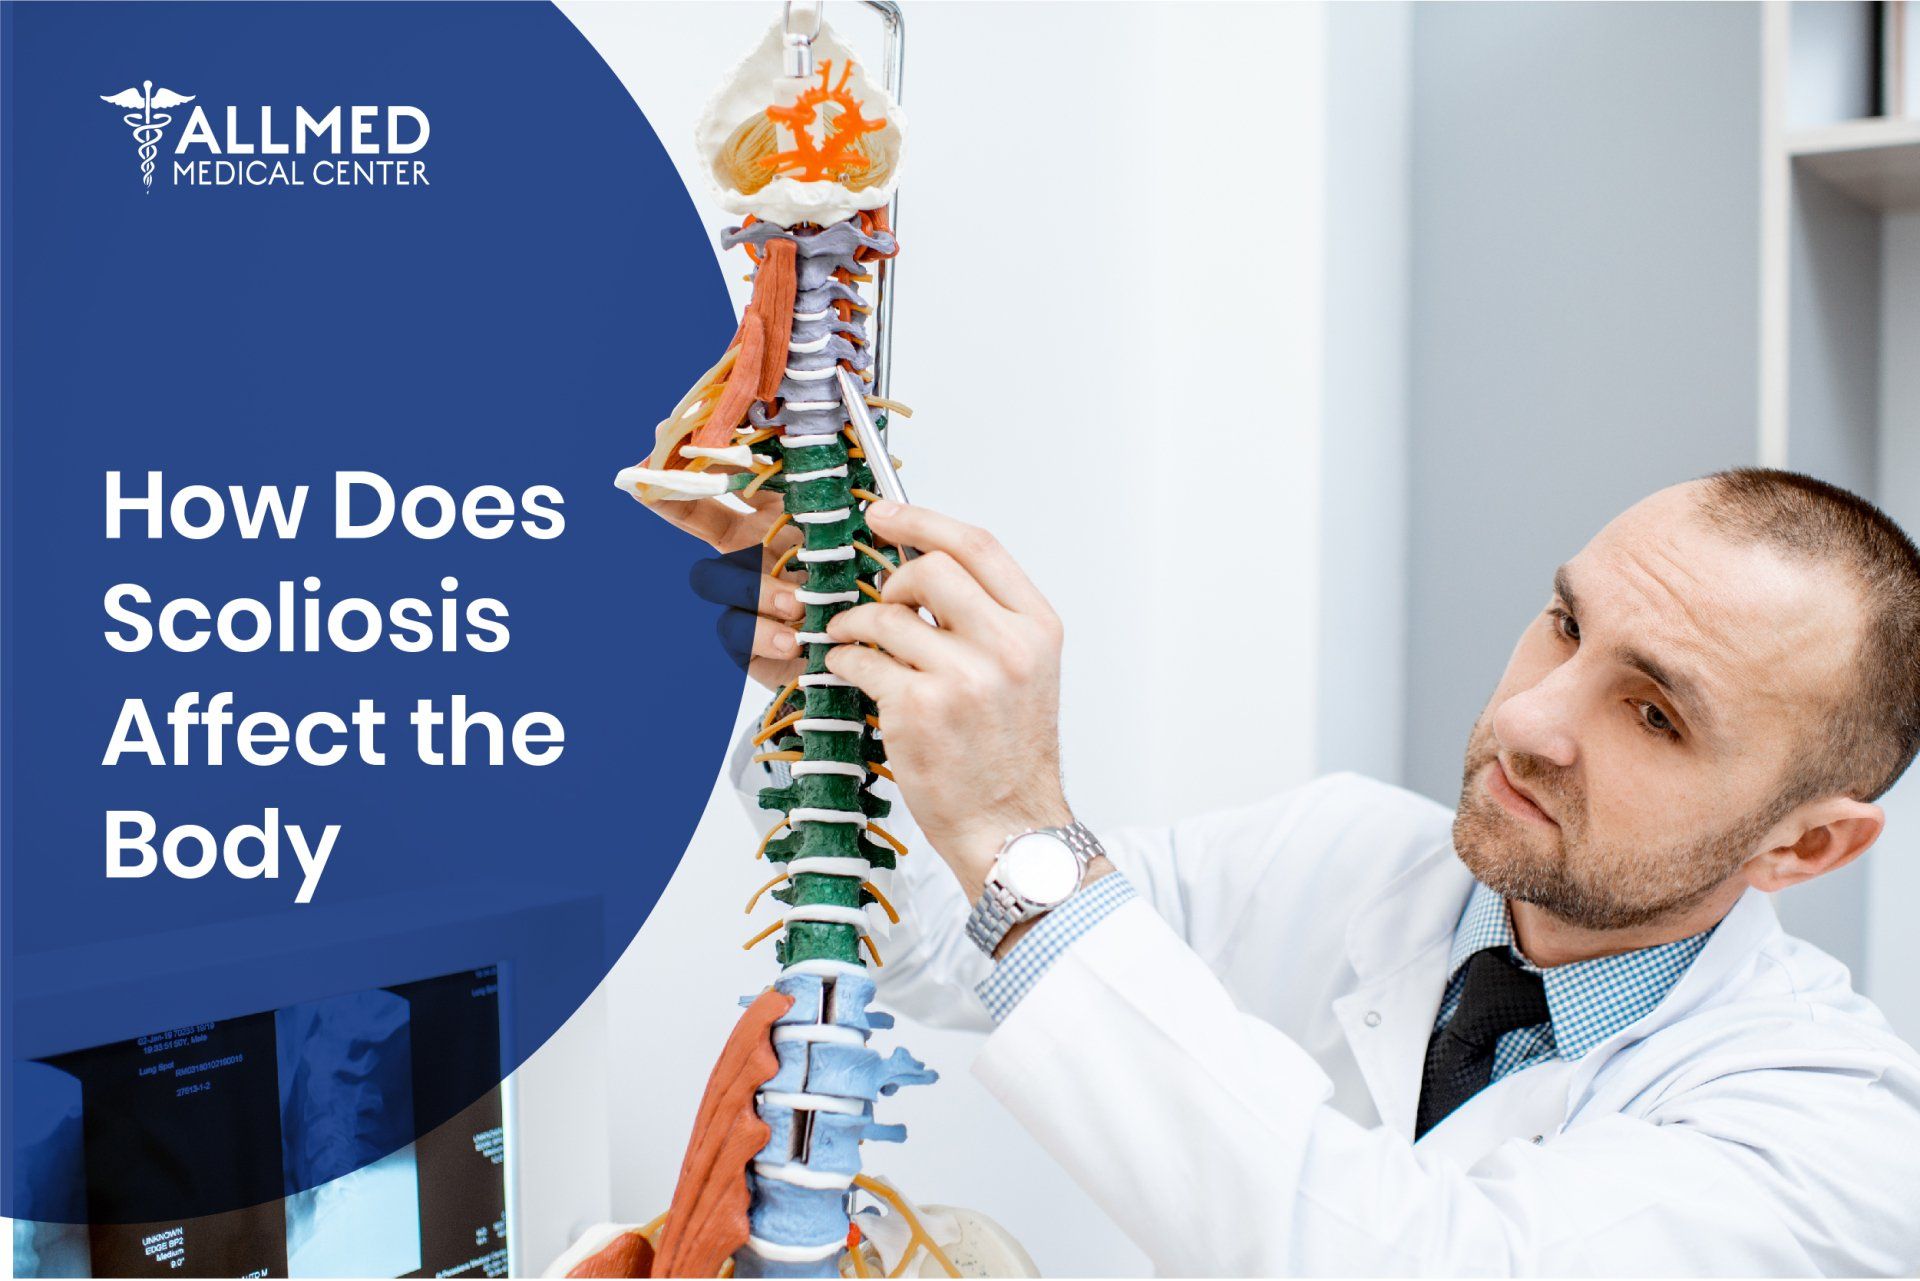 How Scoliosis Affects the Body